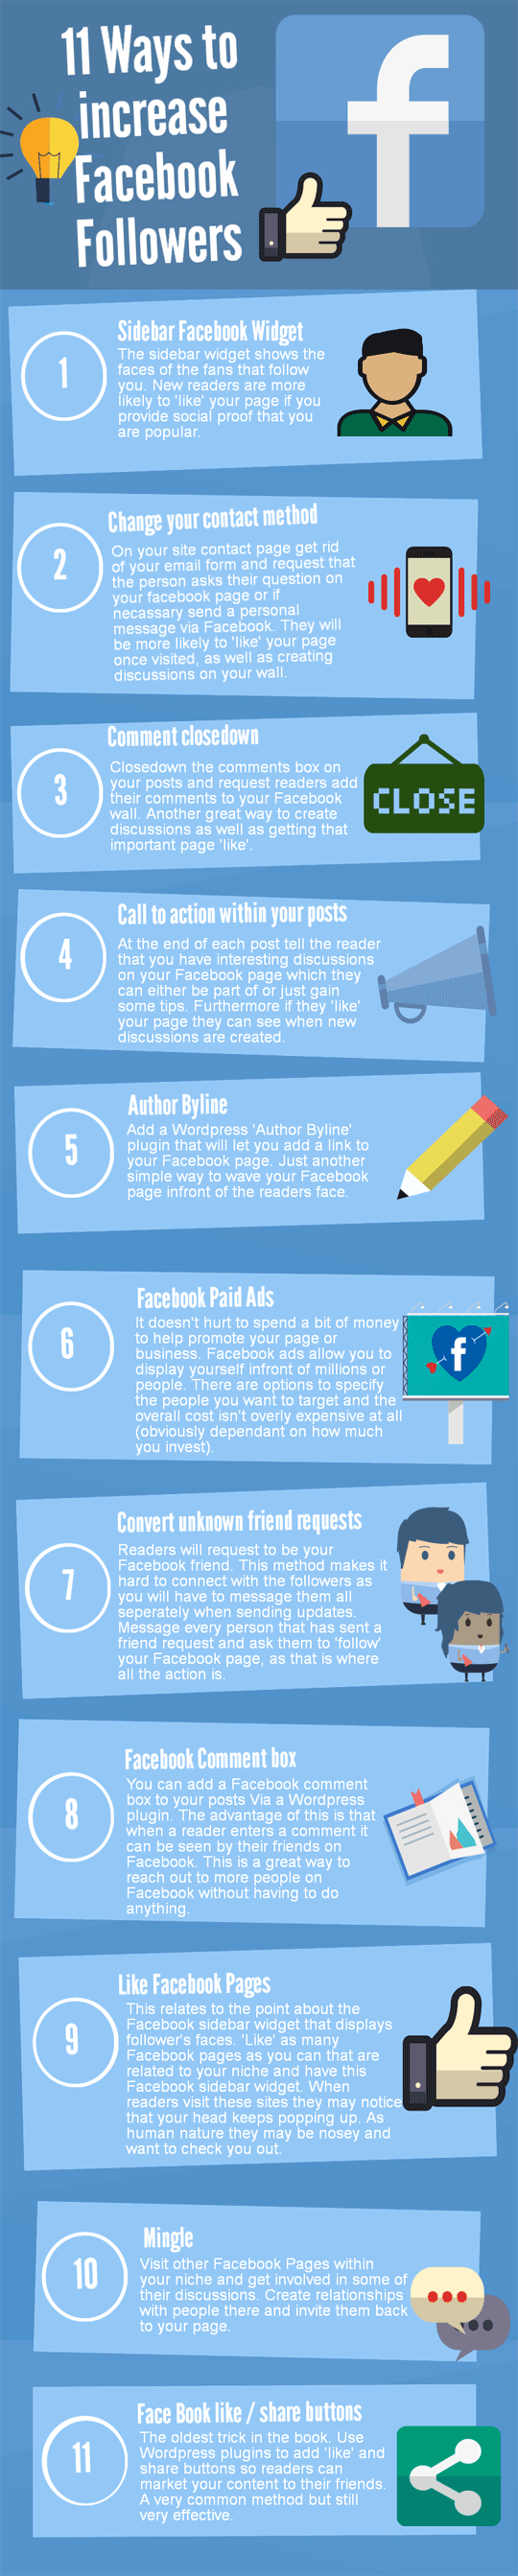 11 Ways To Increase Your Facebook Followers